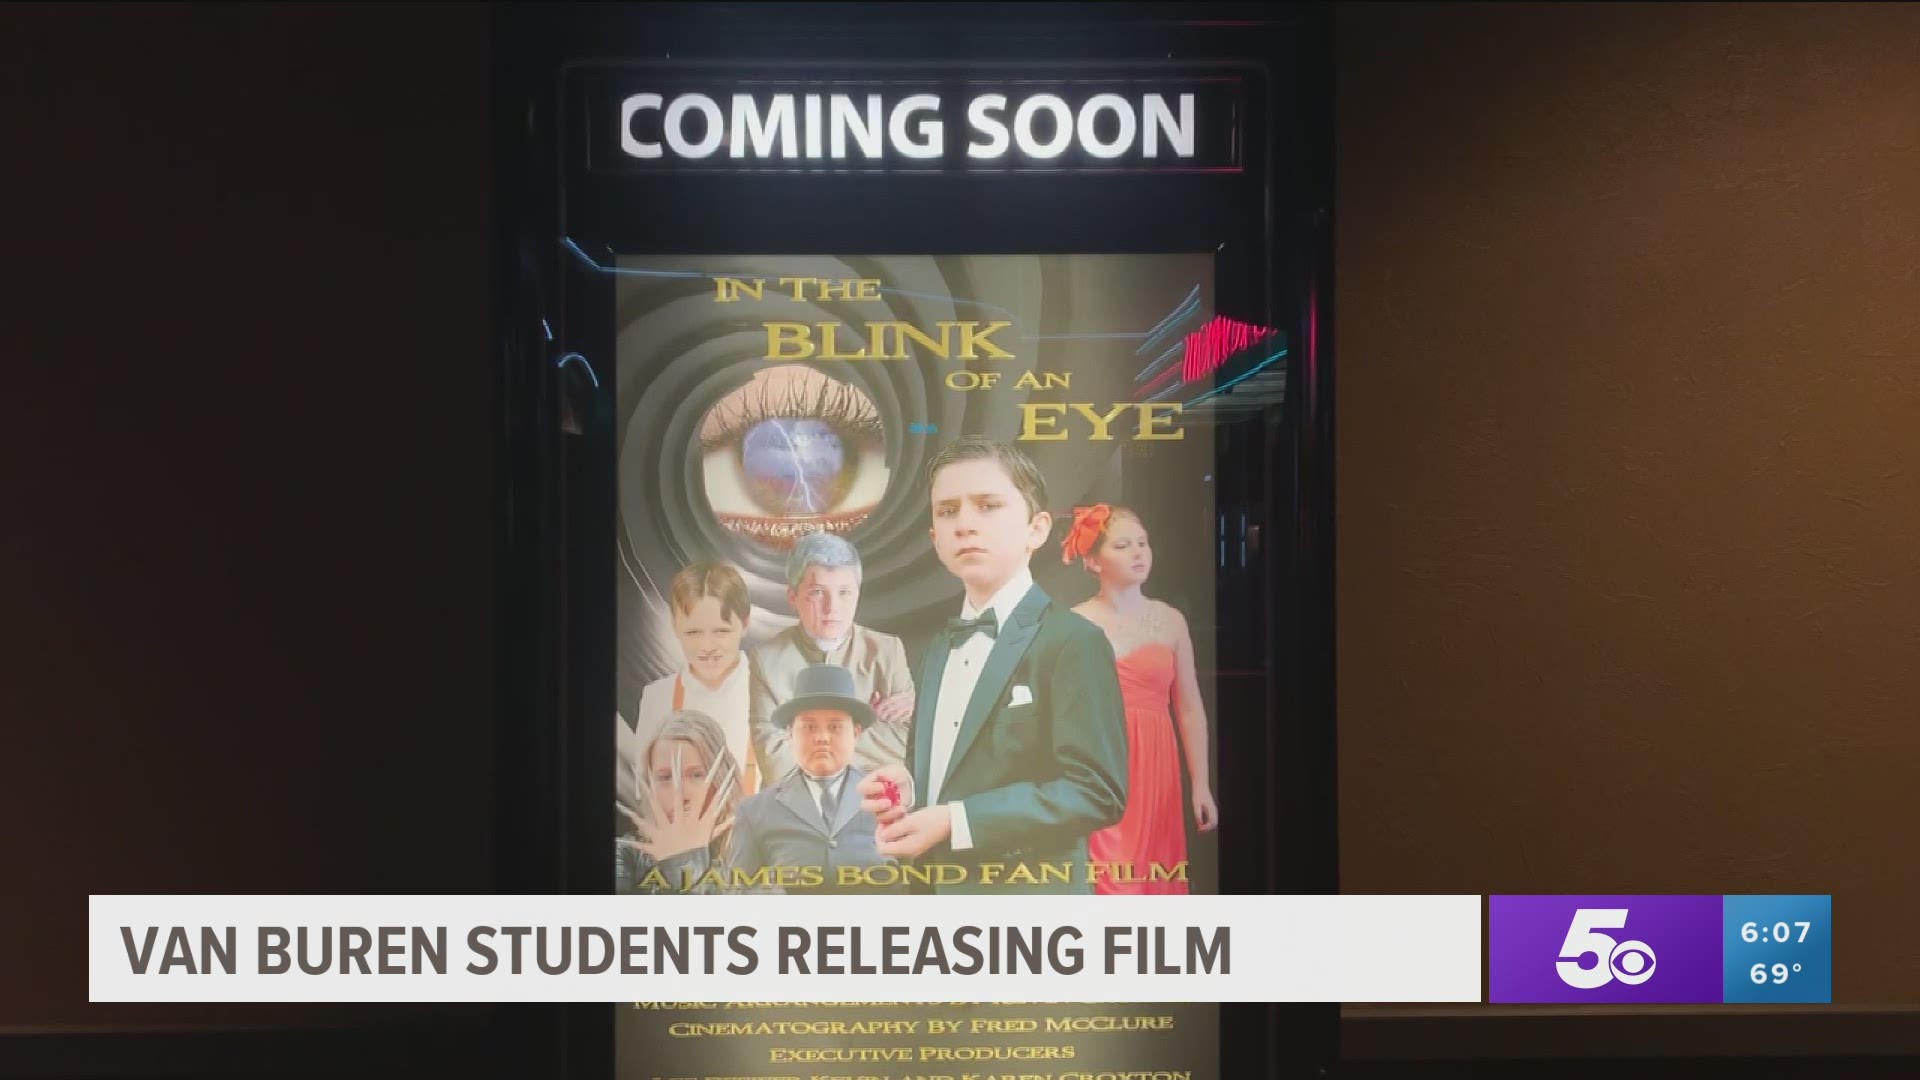 Van Buren Parkview students and their Emmy Award-Winning music teacher Kevin Croxton is making movie magic with a James bond fan film